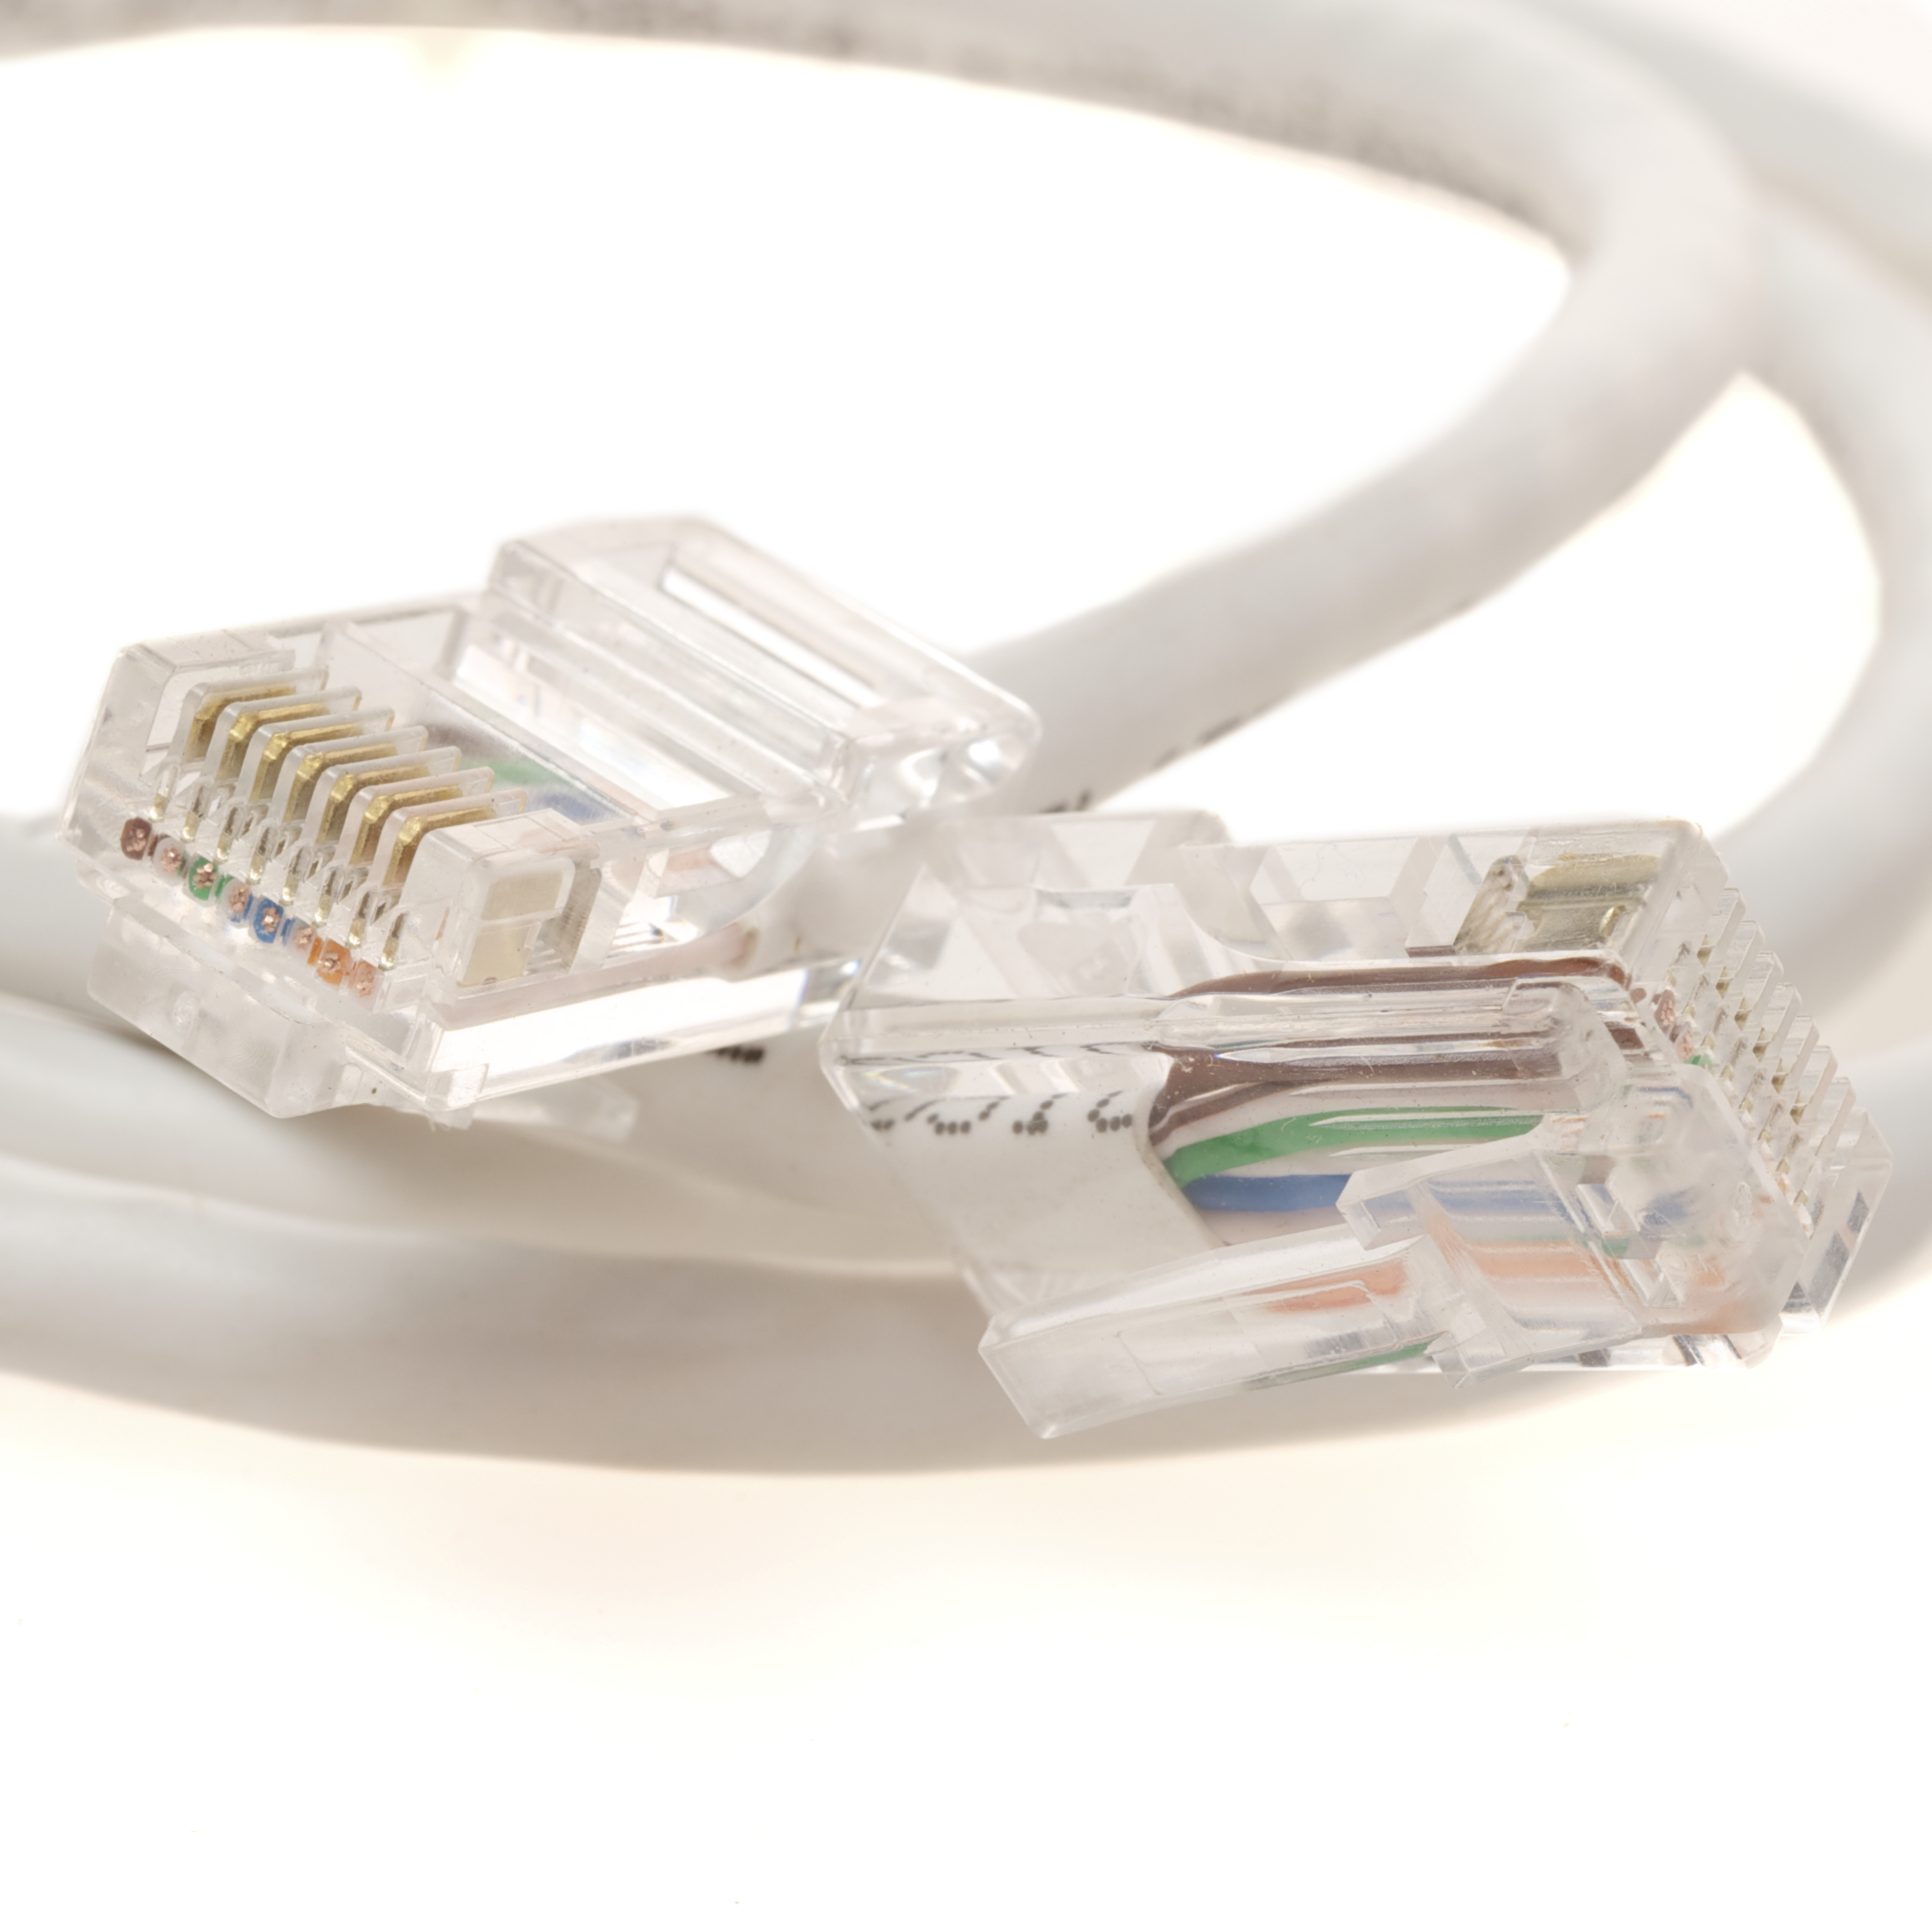 15 Feet Category 5e Network Patch Cable-White-Plenum Rated for in-ceiling installations!